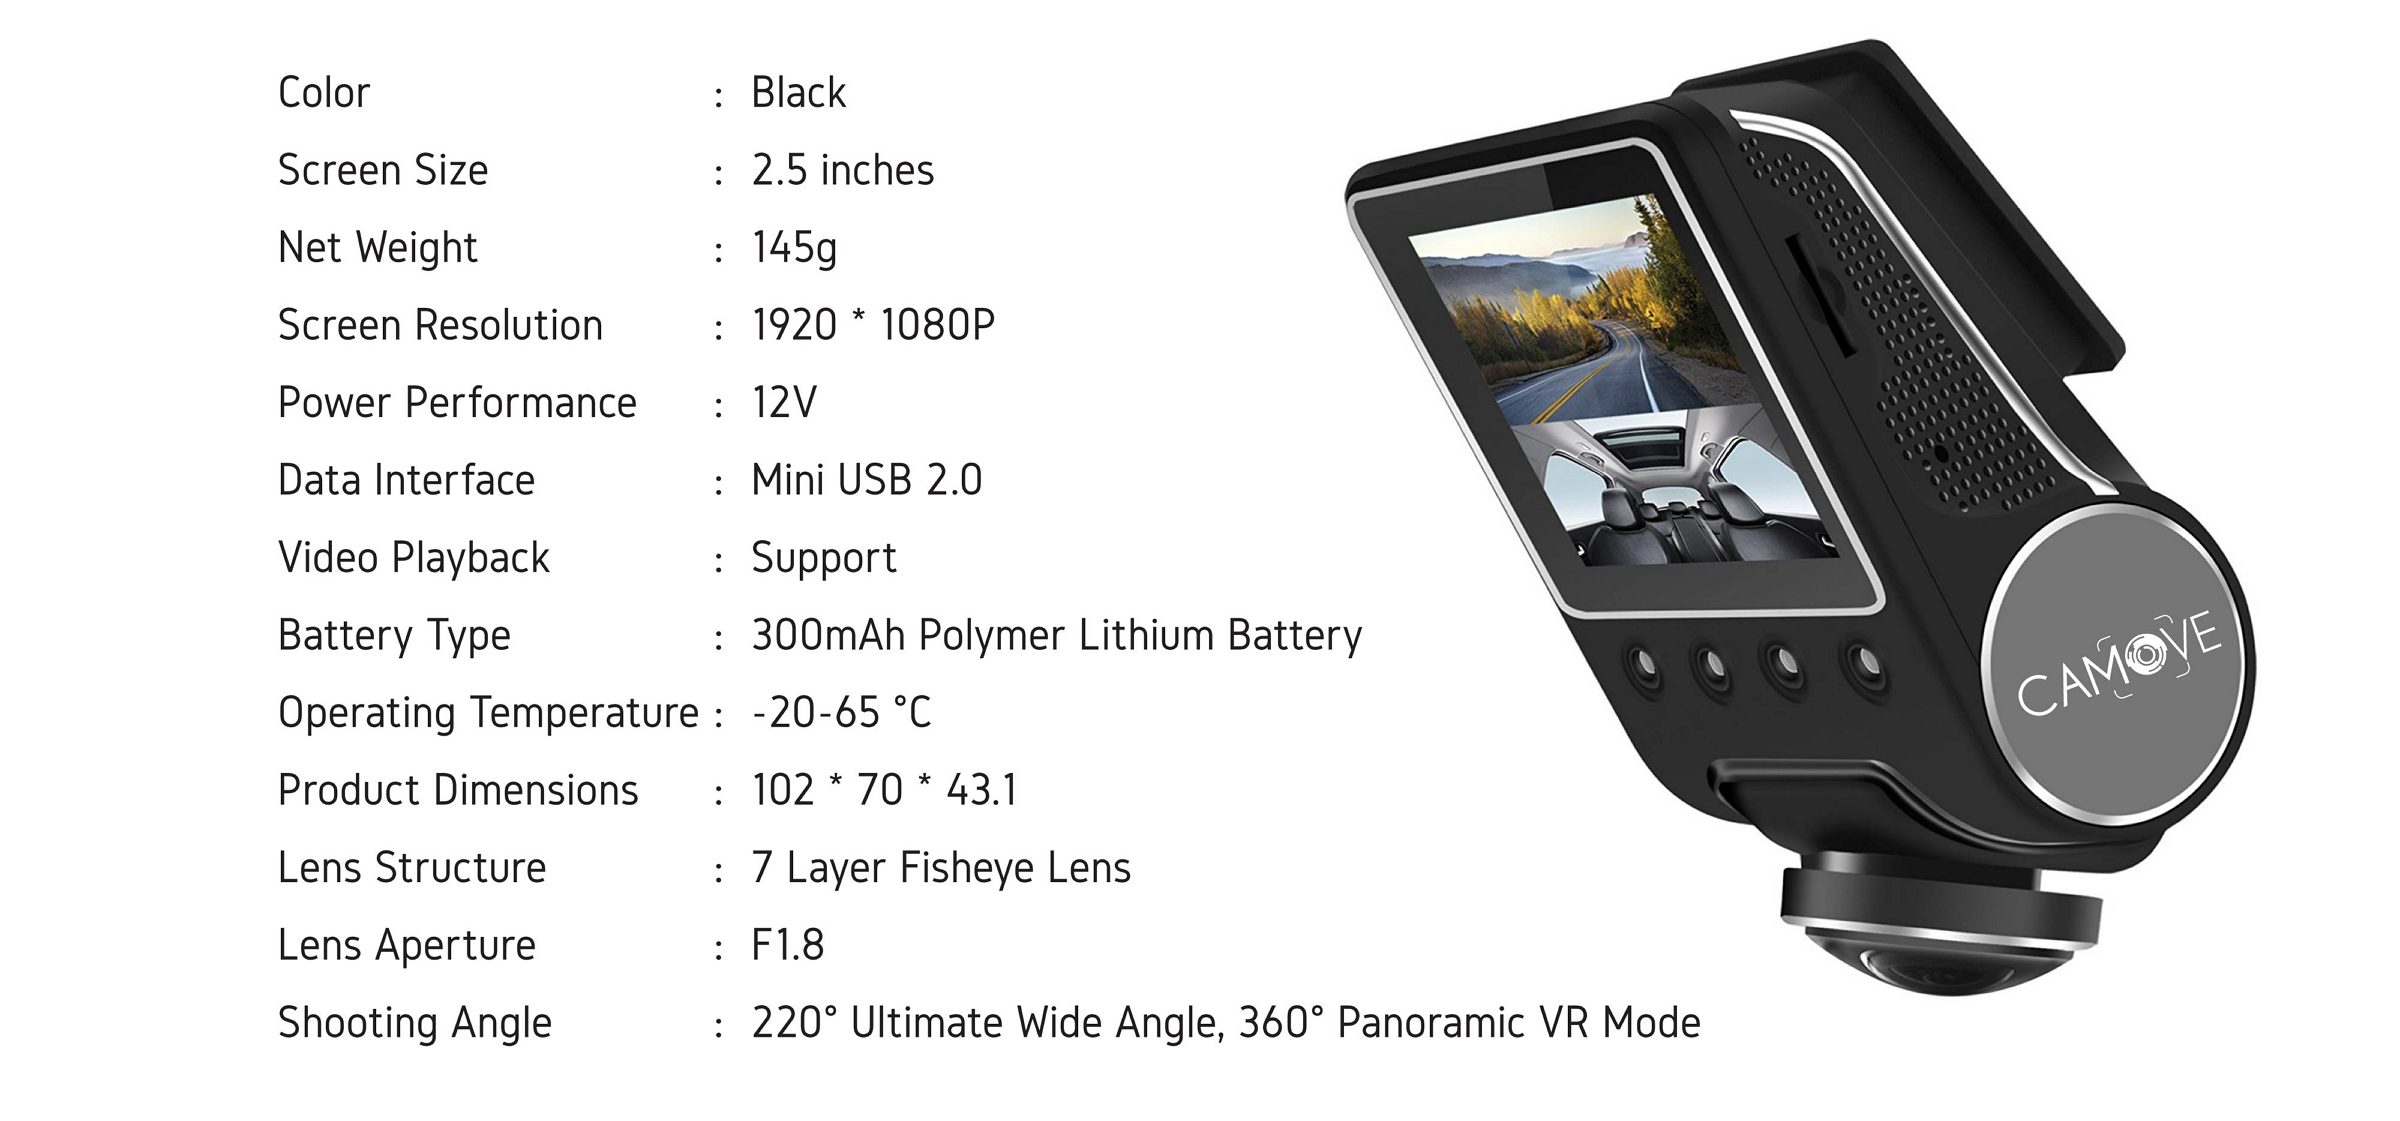 S700 Specification